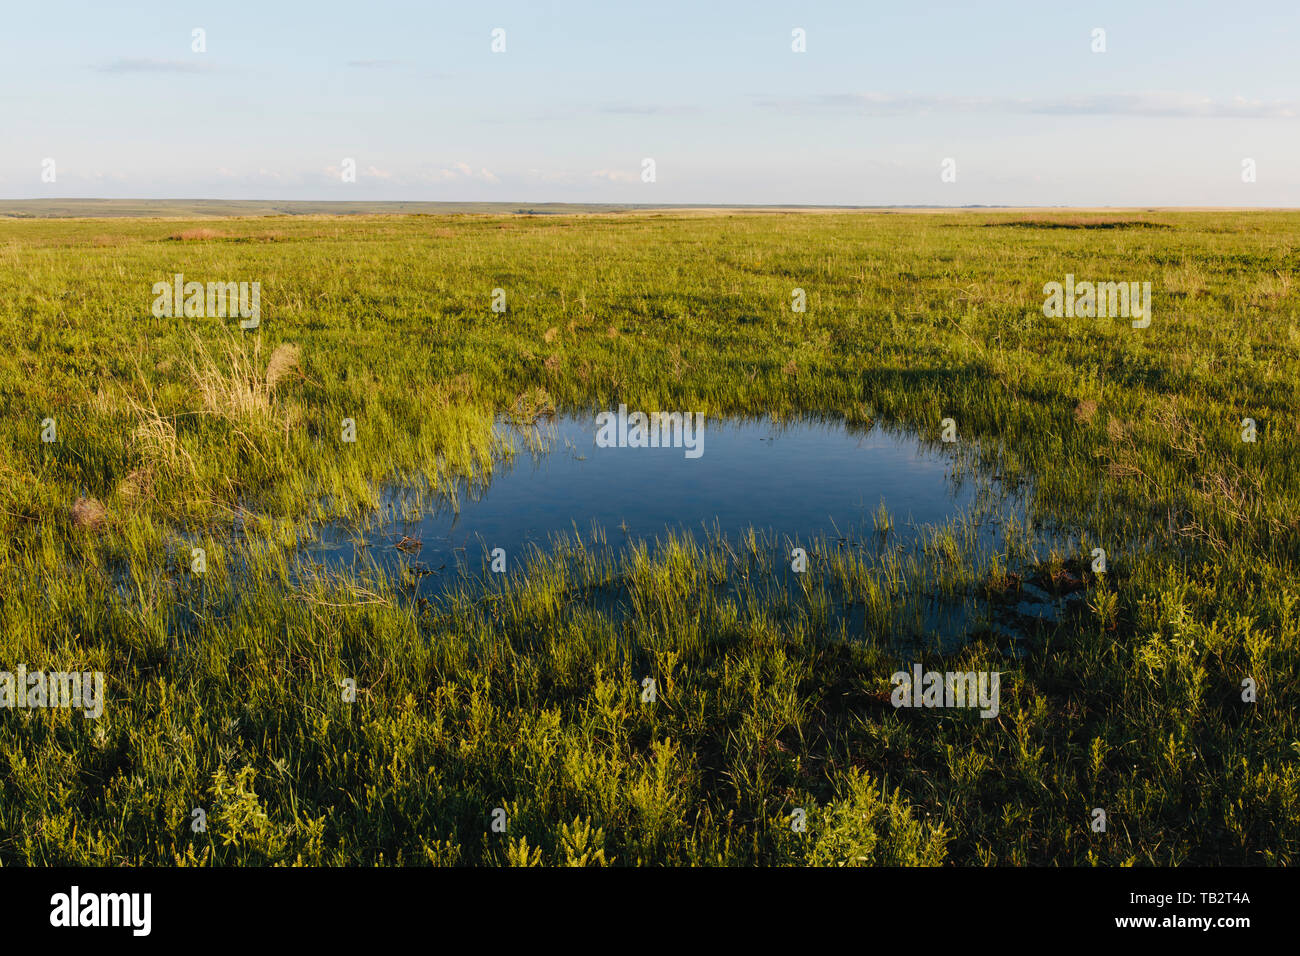 View across the wide open space of the Tallgrass Prairie Preserve in spring, grassland and a small dew pond. Stock Photo